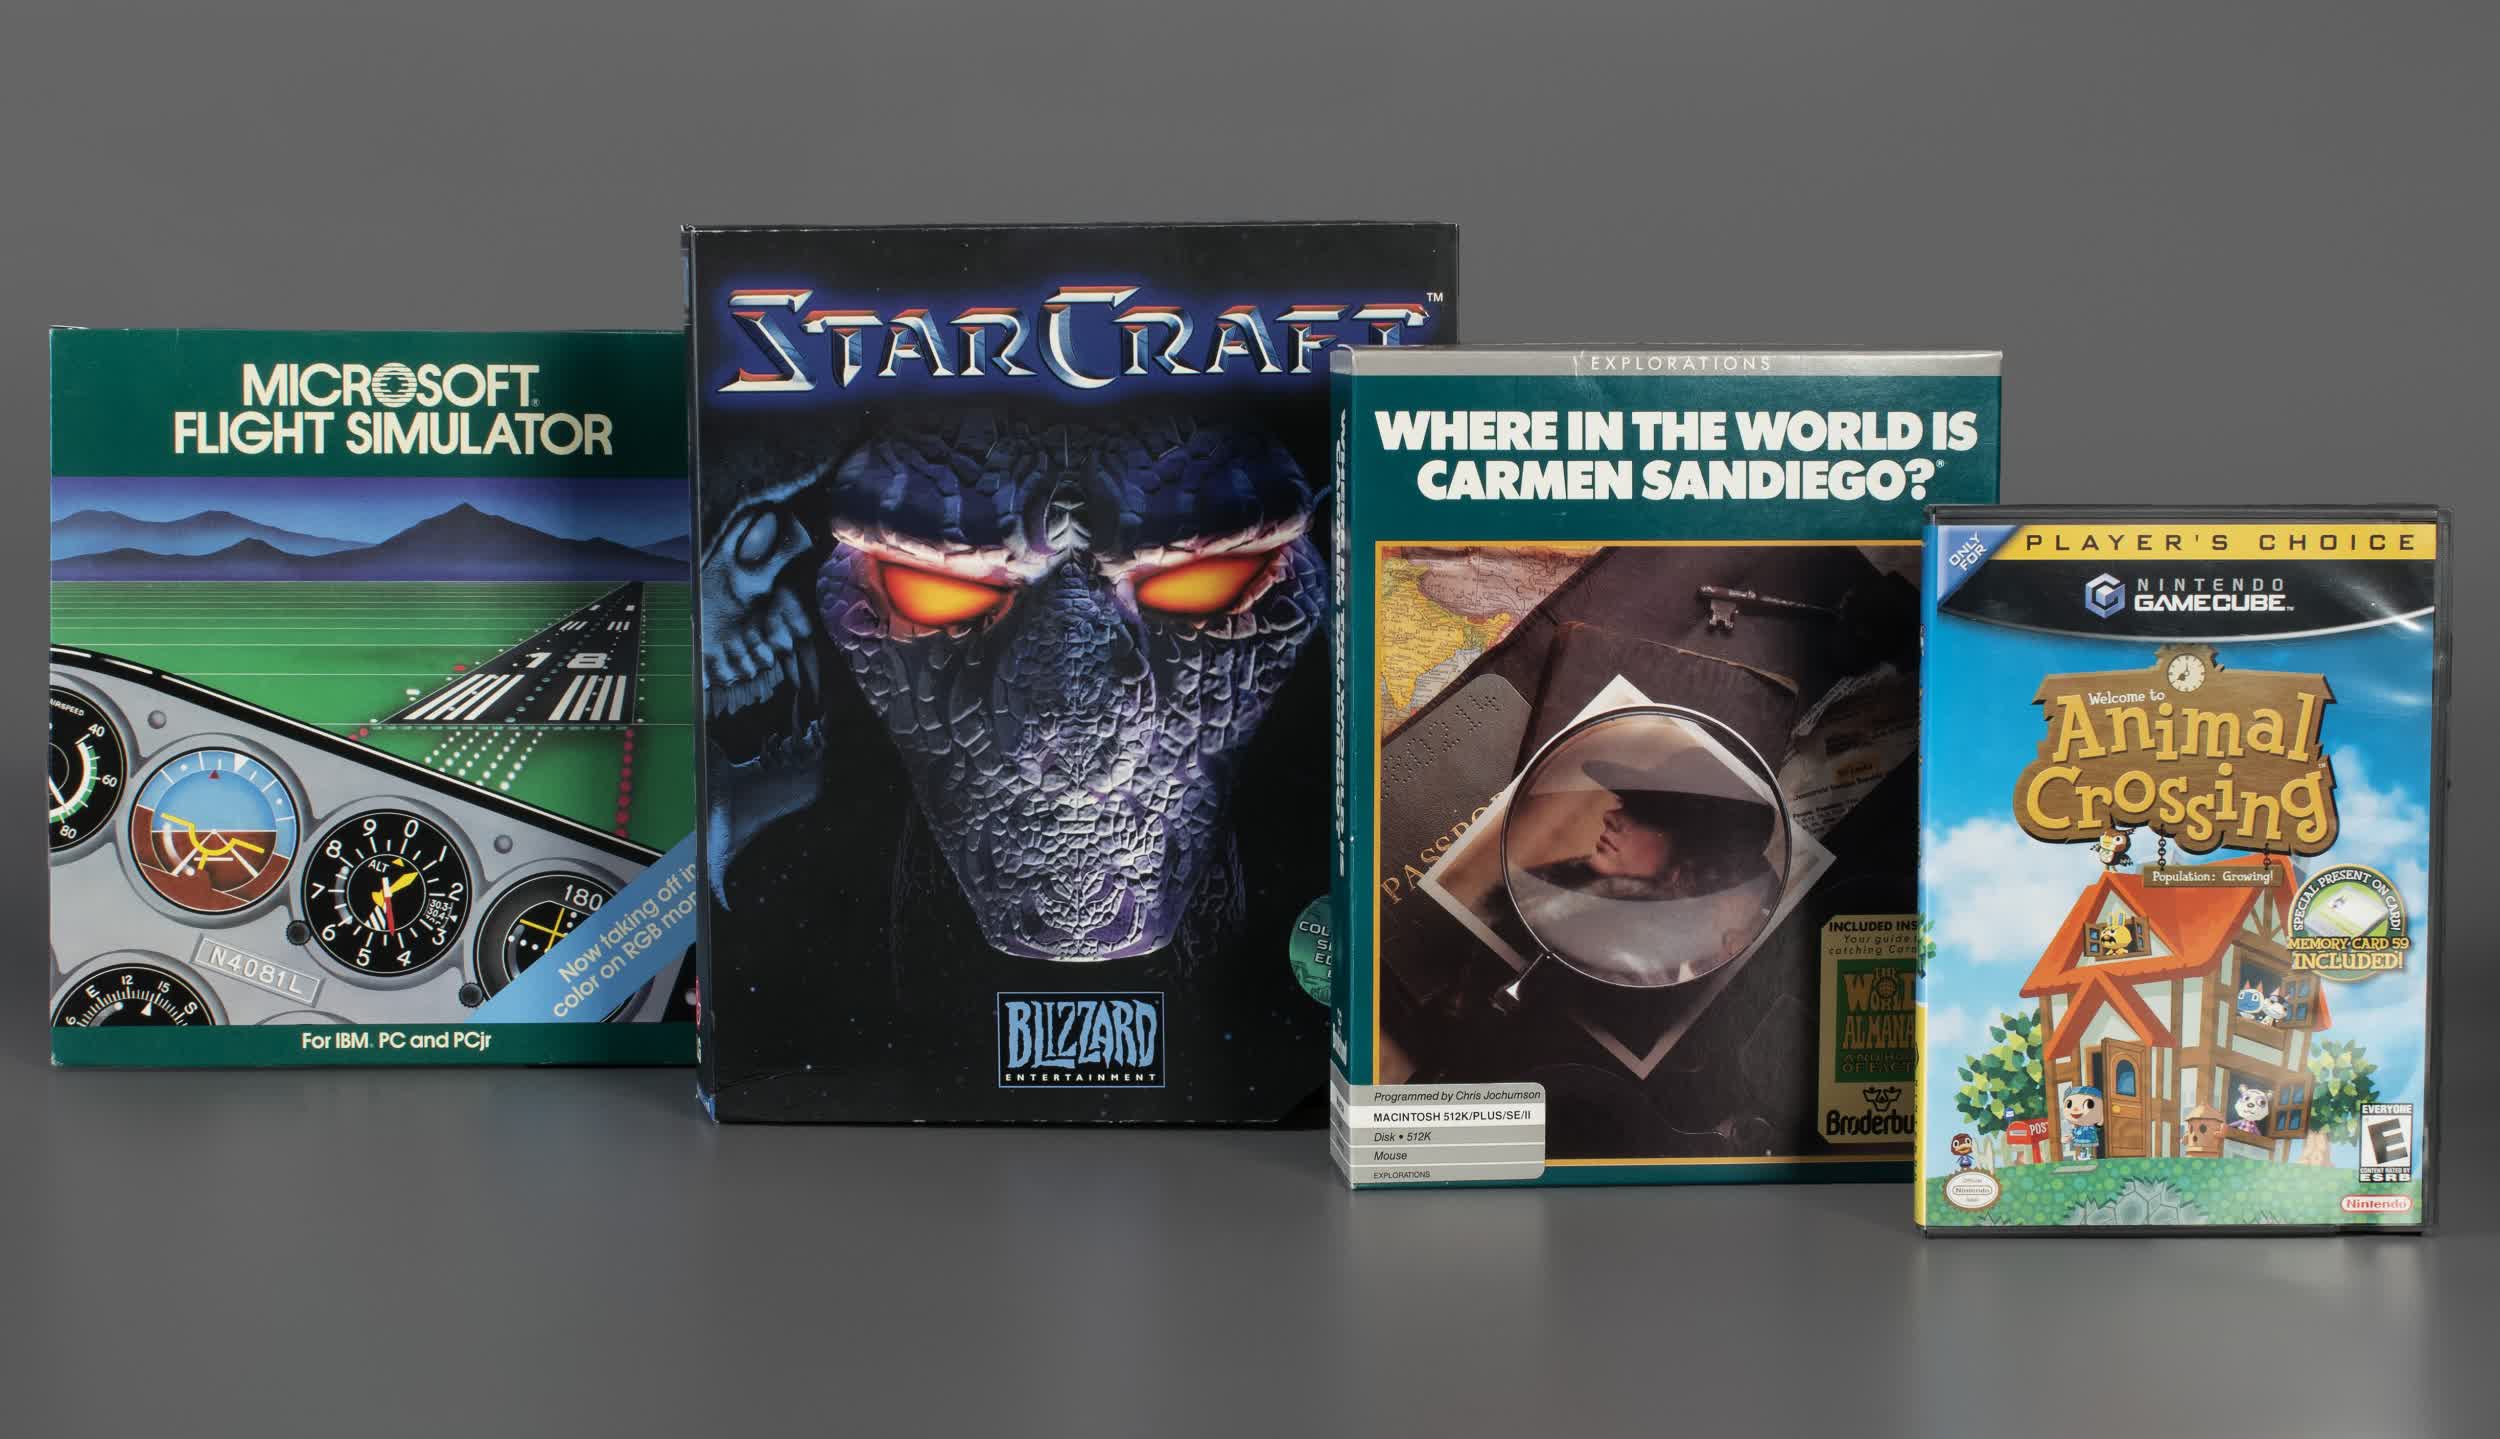 StarCraft and Microsoft Flight Simulator among latest inductees into the Video Game Hall of Fame